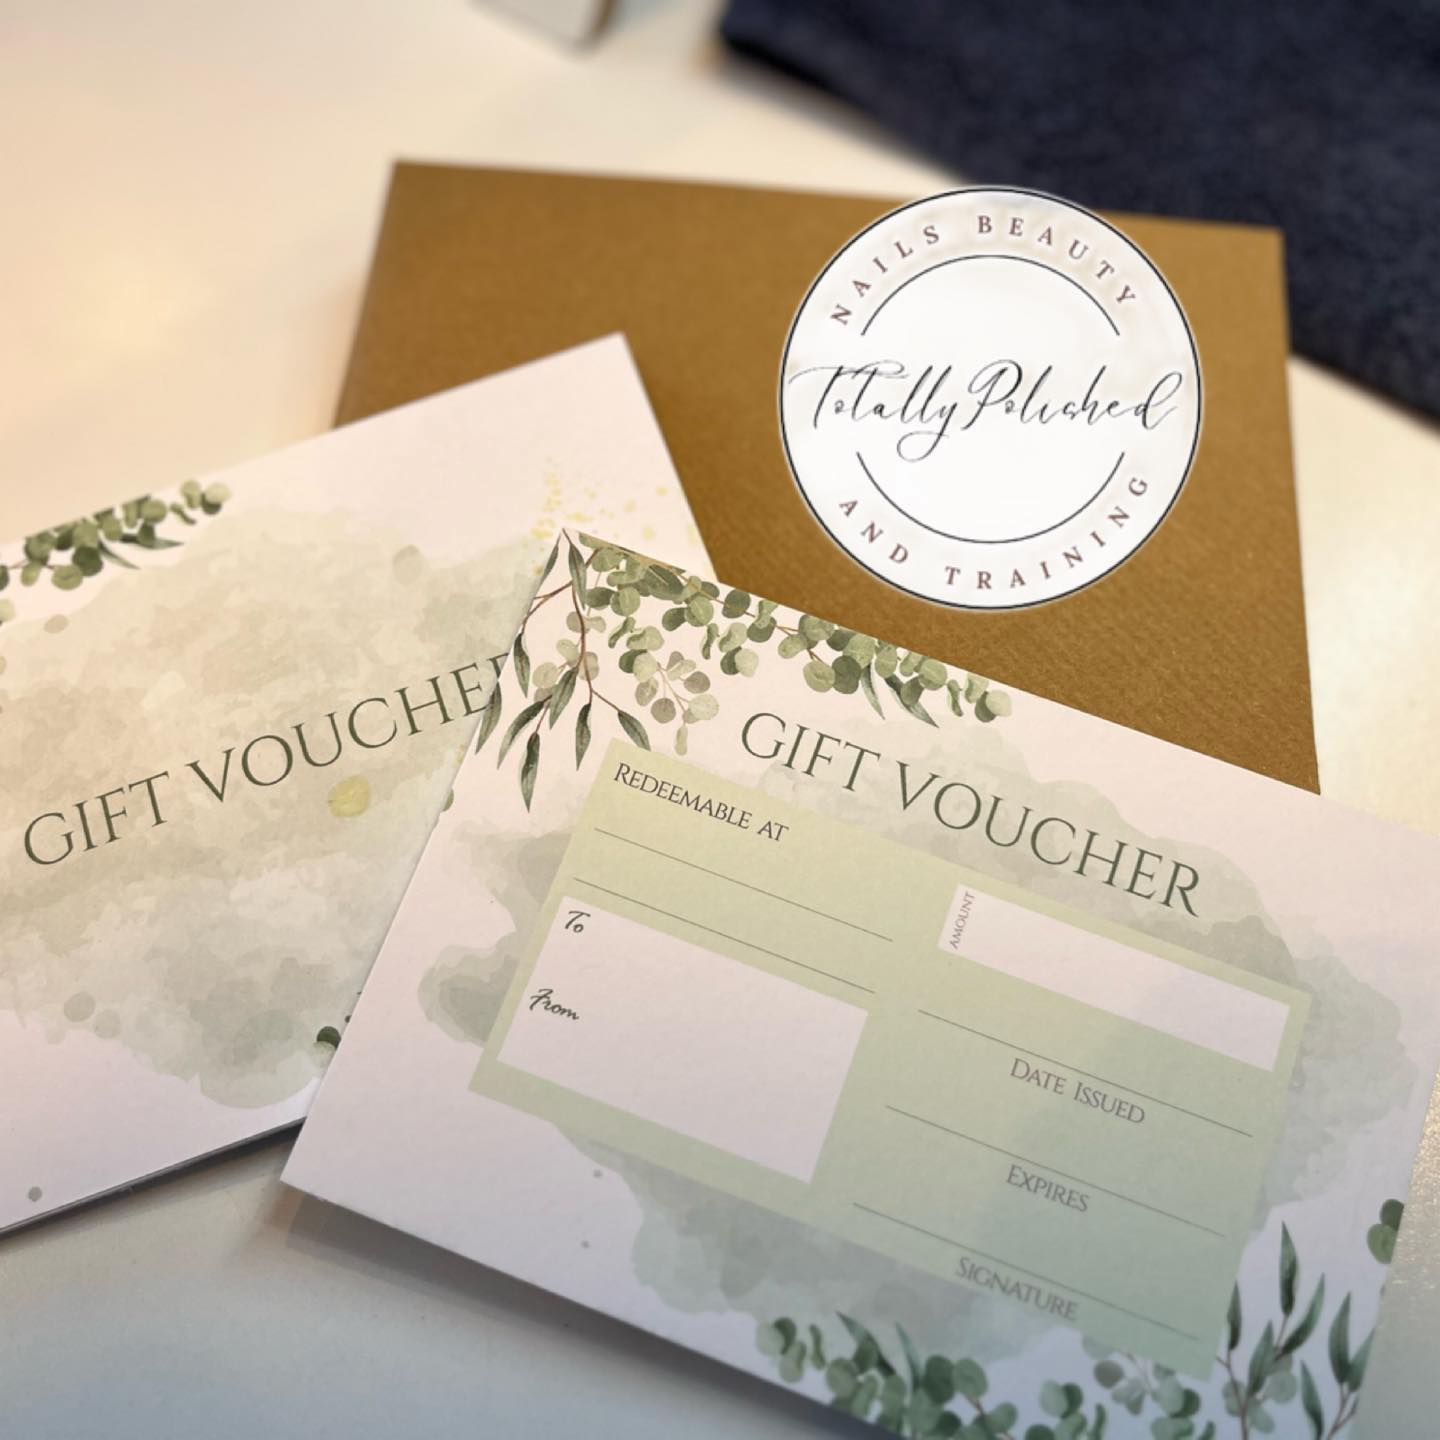 Tottaly Polished Gift Vouchers